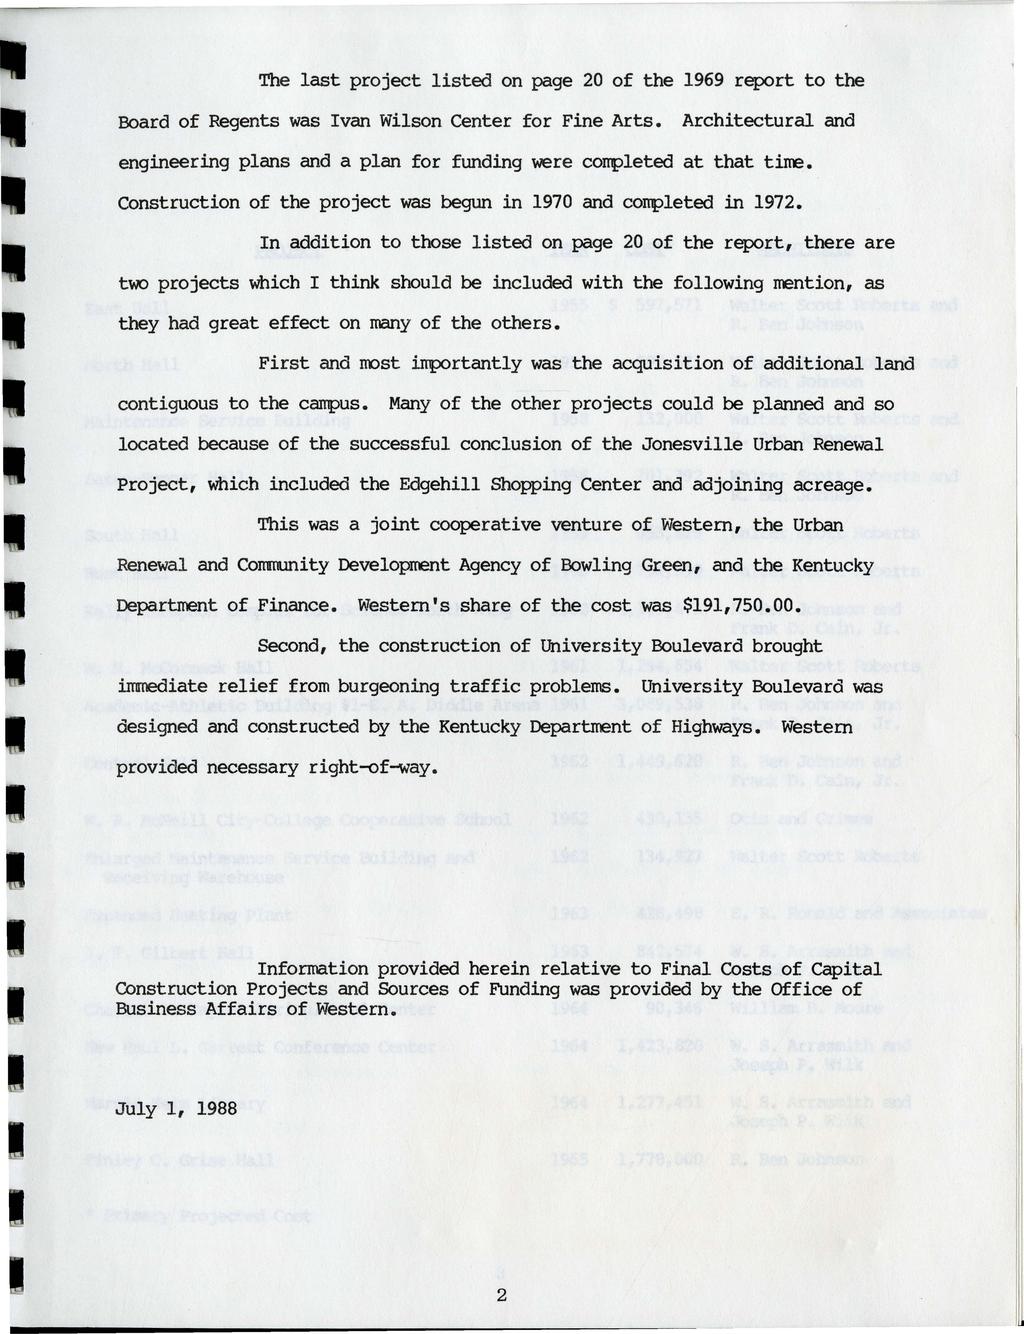 The last project listed on page 20 of the 1969 report to the Board of Regents was Ivan Wilson Center for Fine Arts.